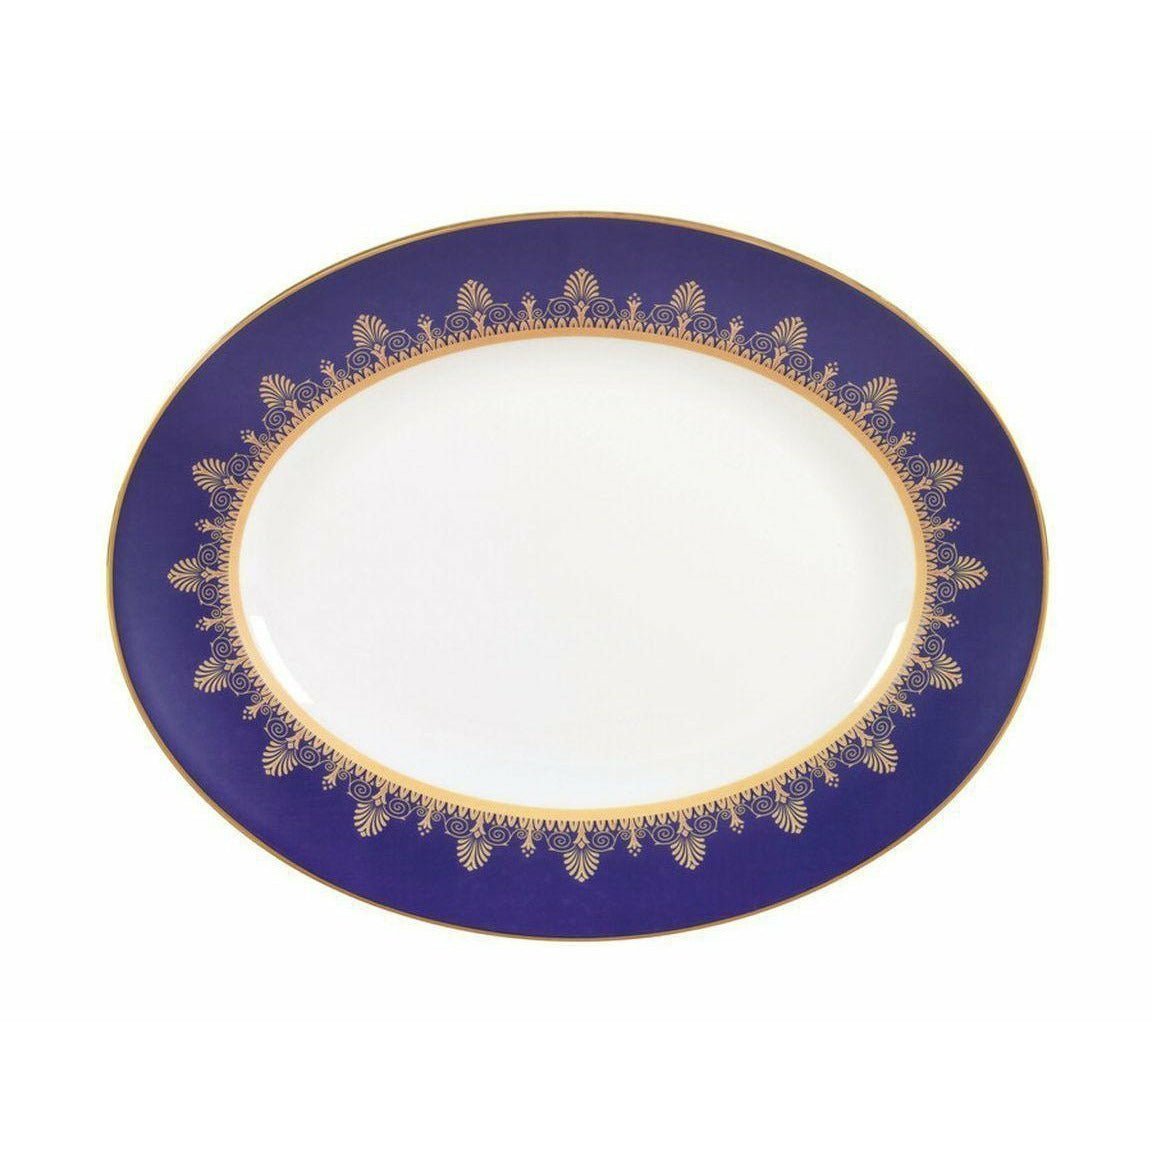 Wedgwood Anthemion Blue Oval Serving Plate, W: 35 Cm